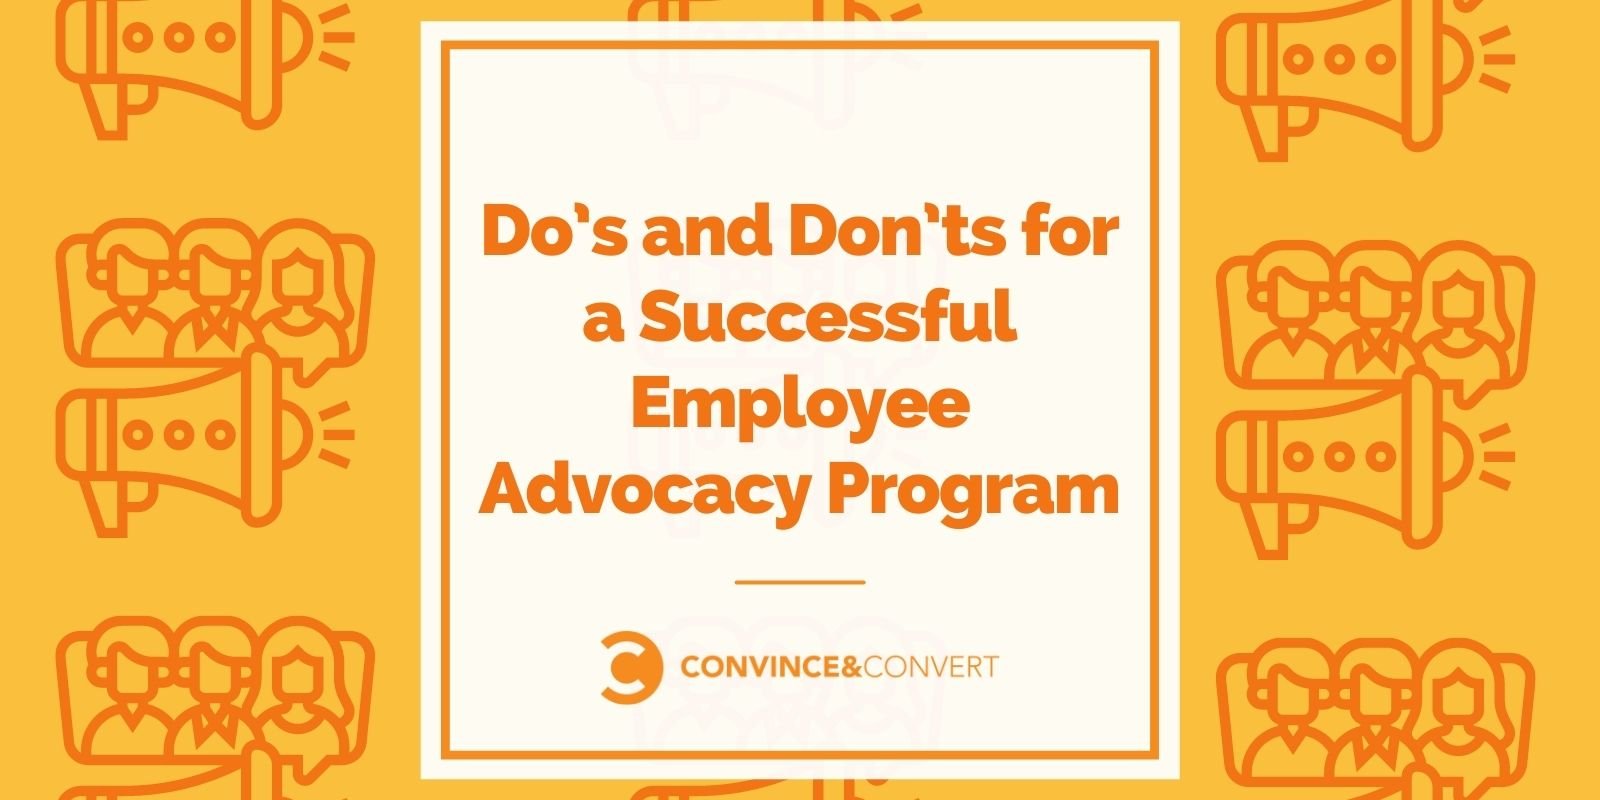 Construct’s and Don’ts for a A success Worker Advocacy Program